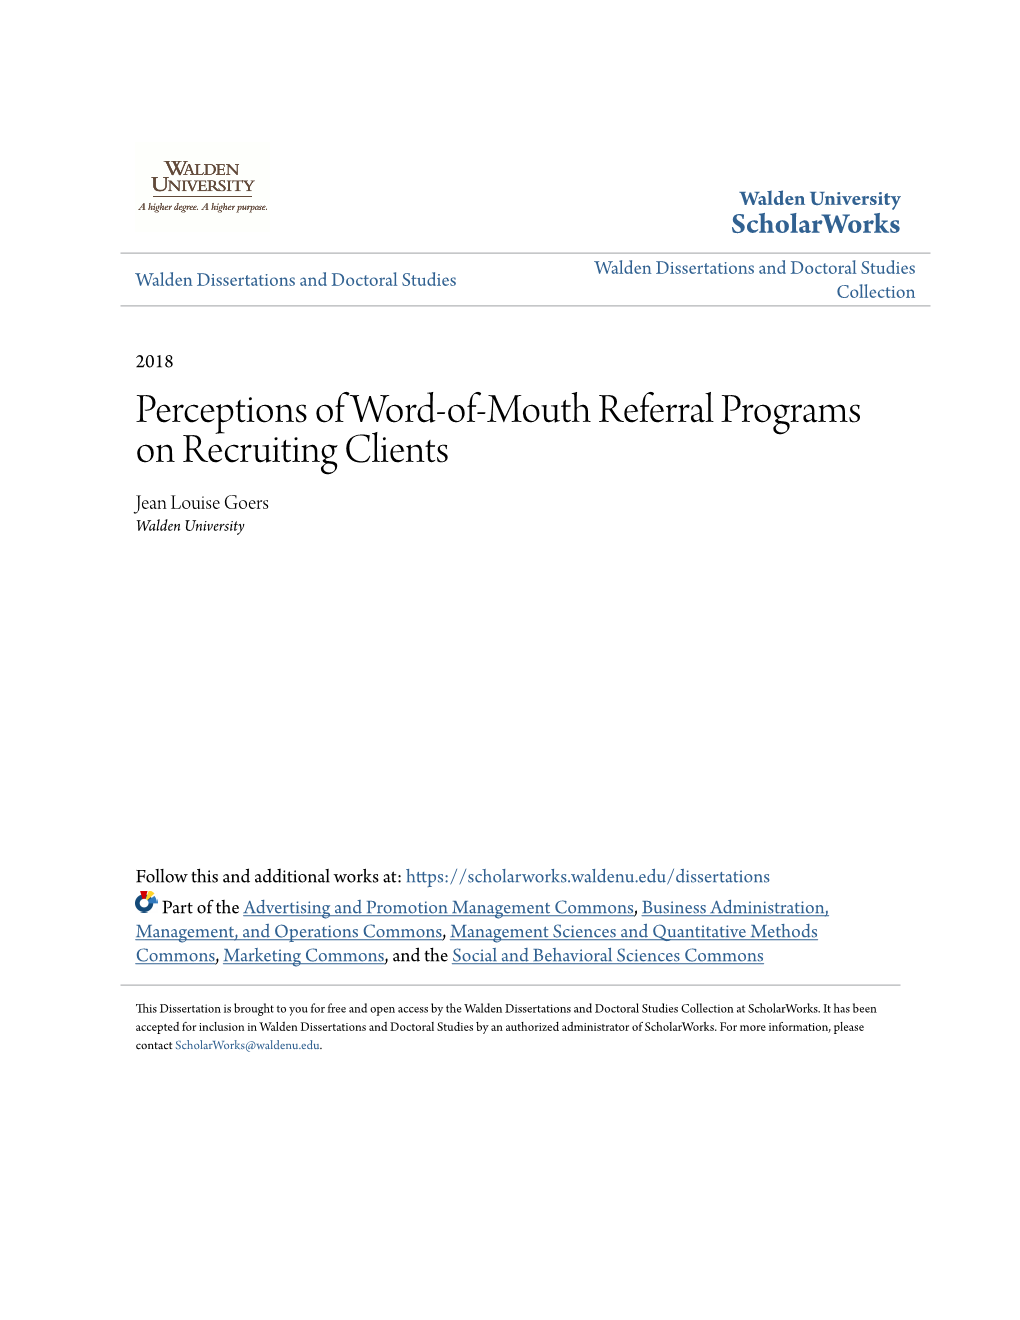 Perceptions of Word-Of-Mouth Referral Programs on Recruiting Clients Jean Louise Goers Walden University